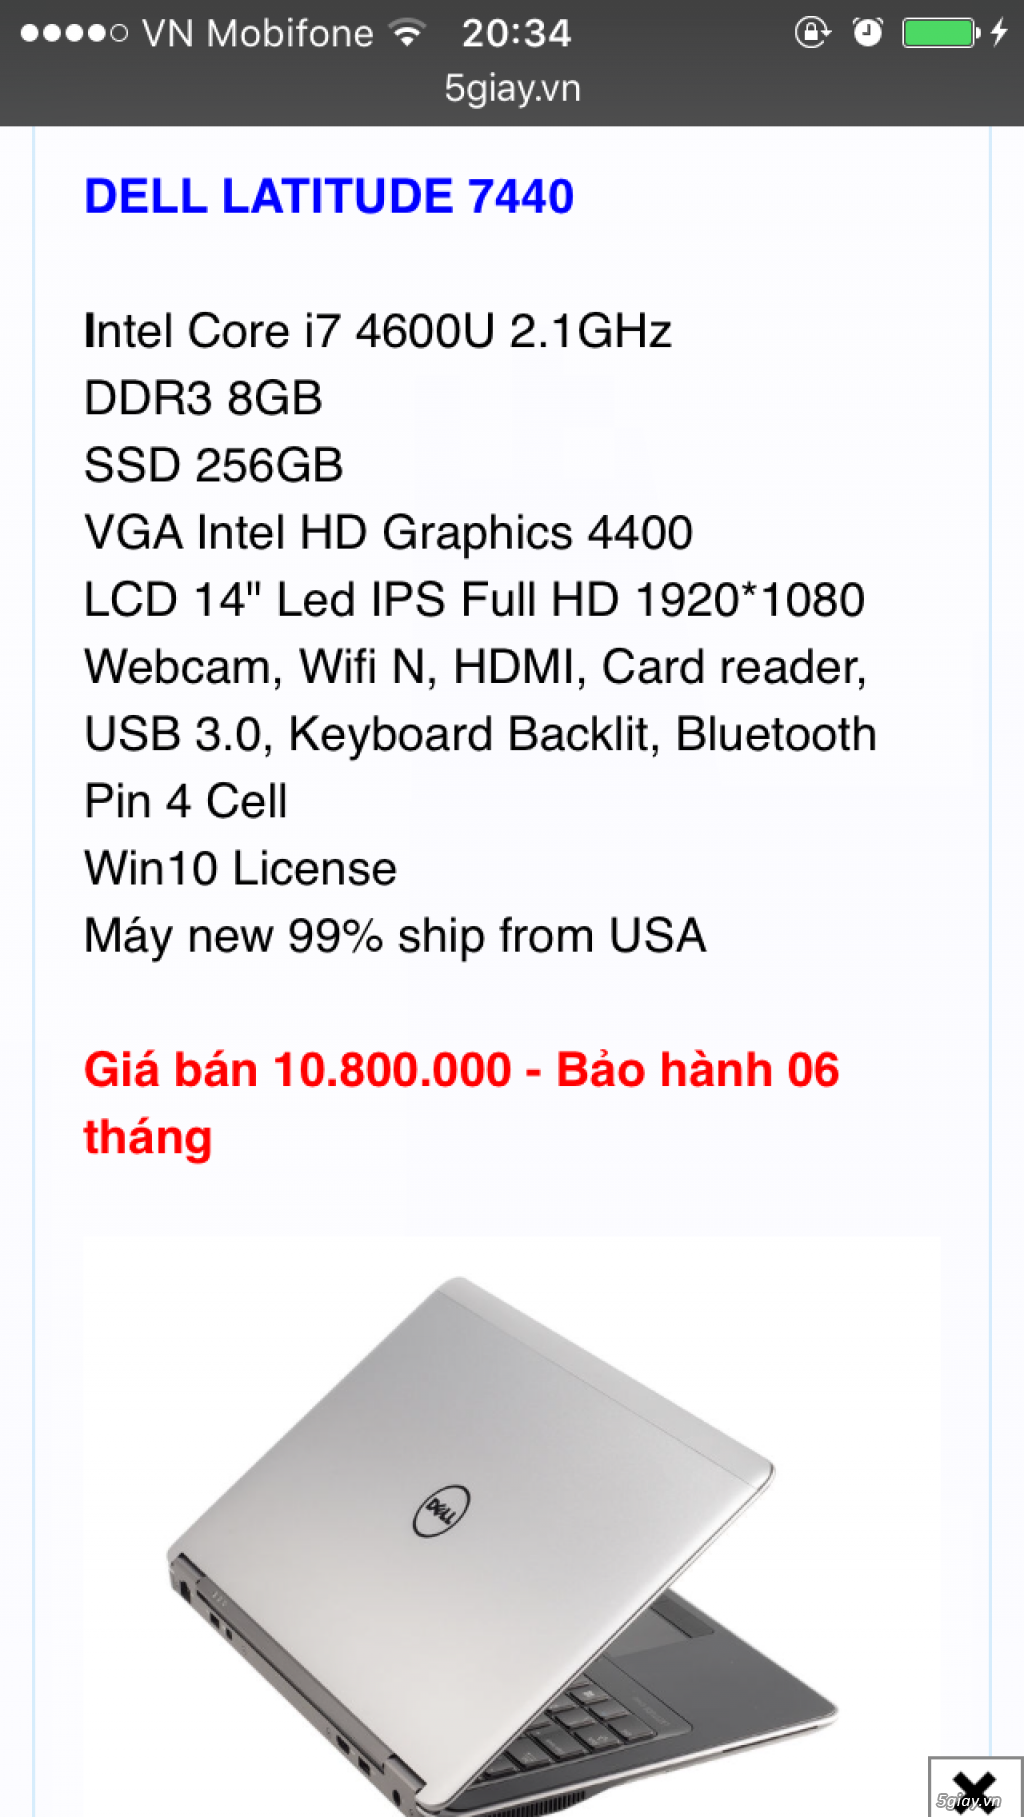 List hàng Laptop cao cấp Macbook-SONY-DELL-HP-ASUS-LENOVO-ACER-SAMSUNG ship từ USA